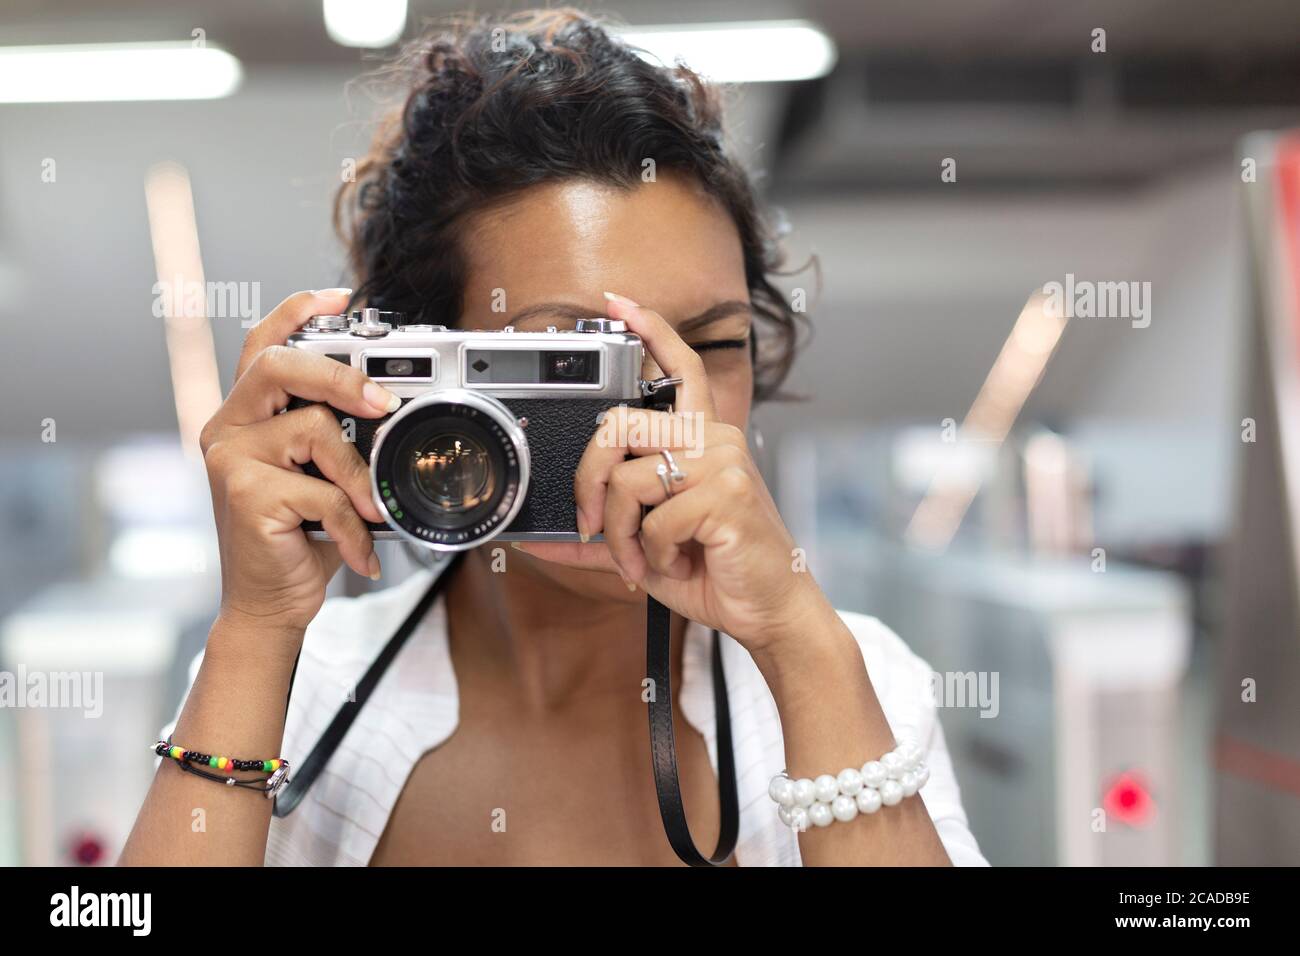 Close-up of a woman with exotic features taking a picture with an analog film camera. Selective focus. Concept of travel and tourism. Stock Photo